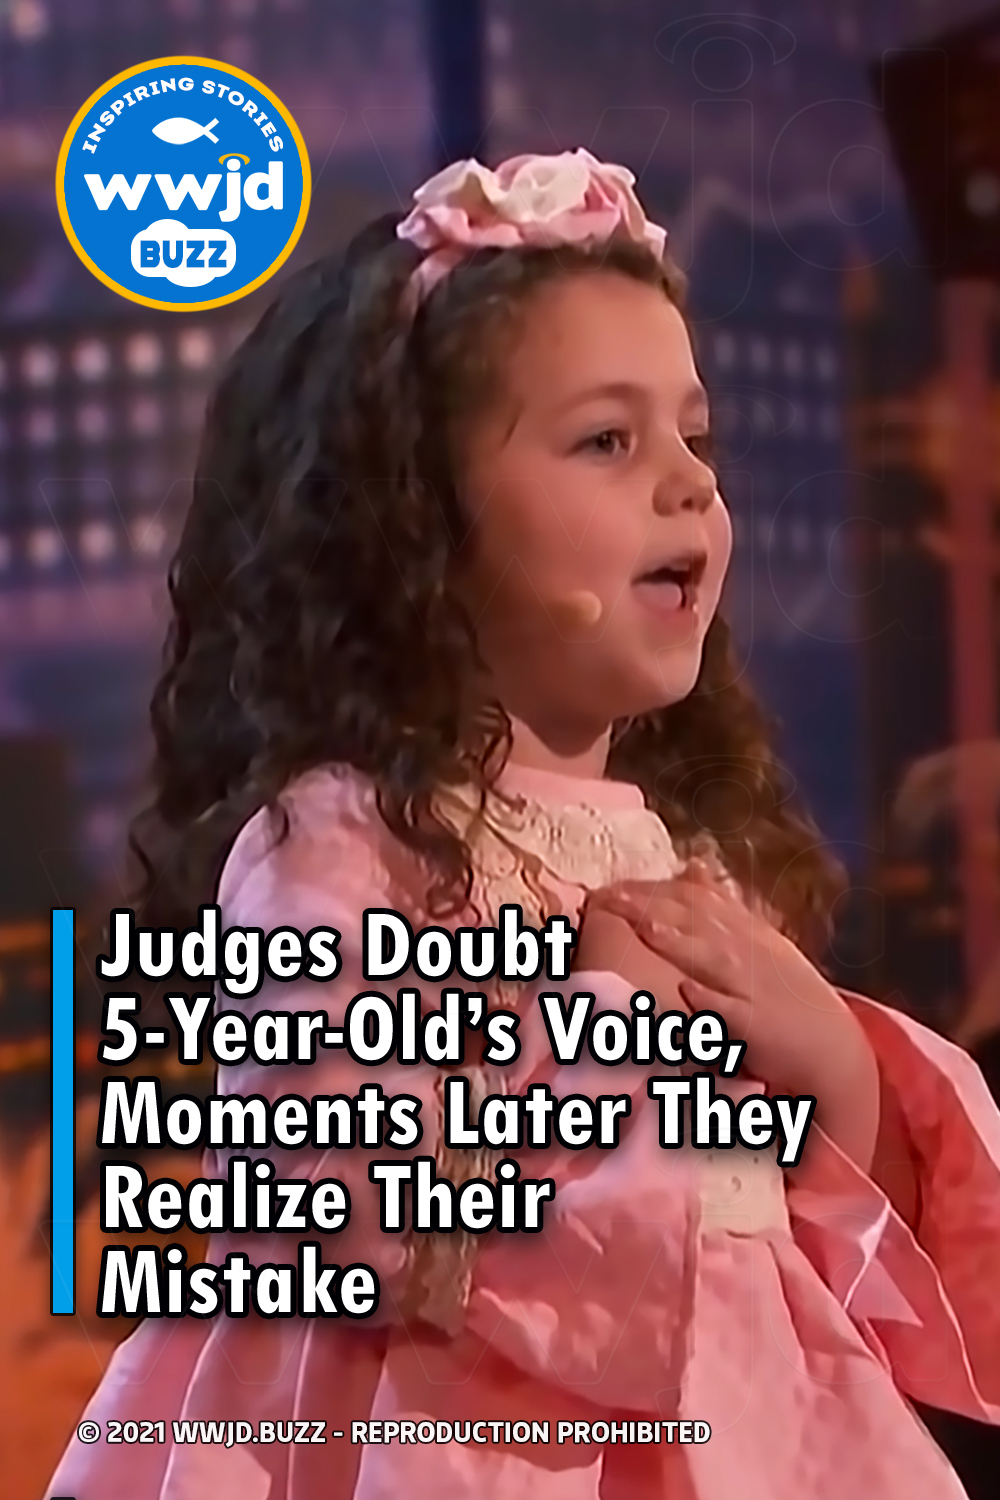 Judges Doubt 5-Year-Old\'s Voice, Moments Later They Realize Their Mistake